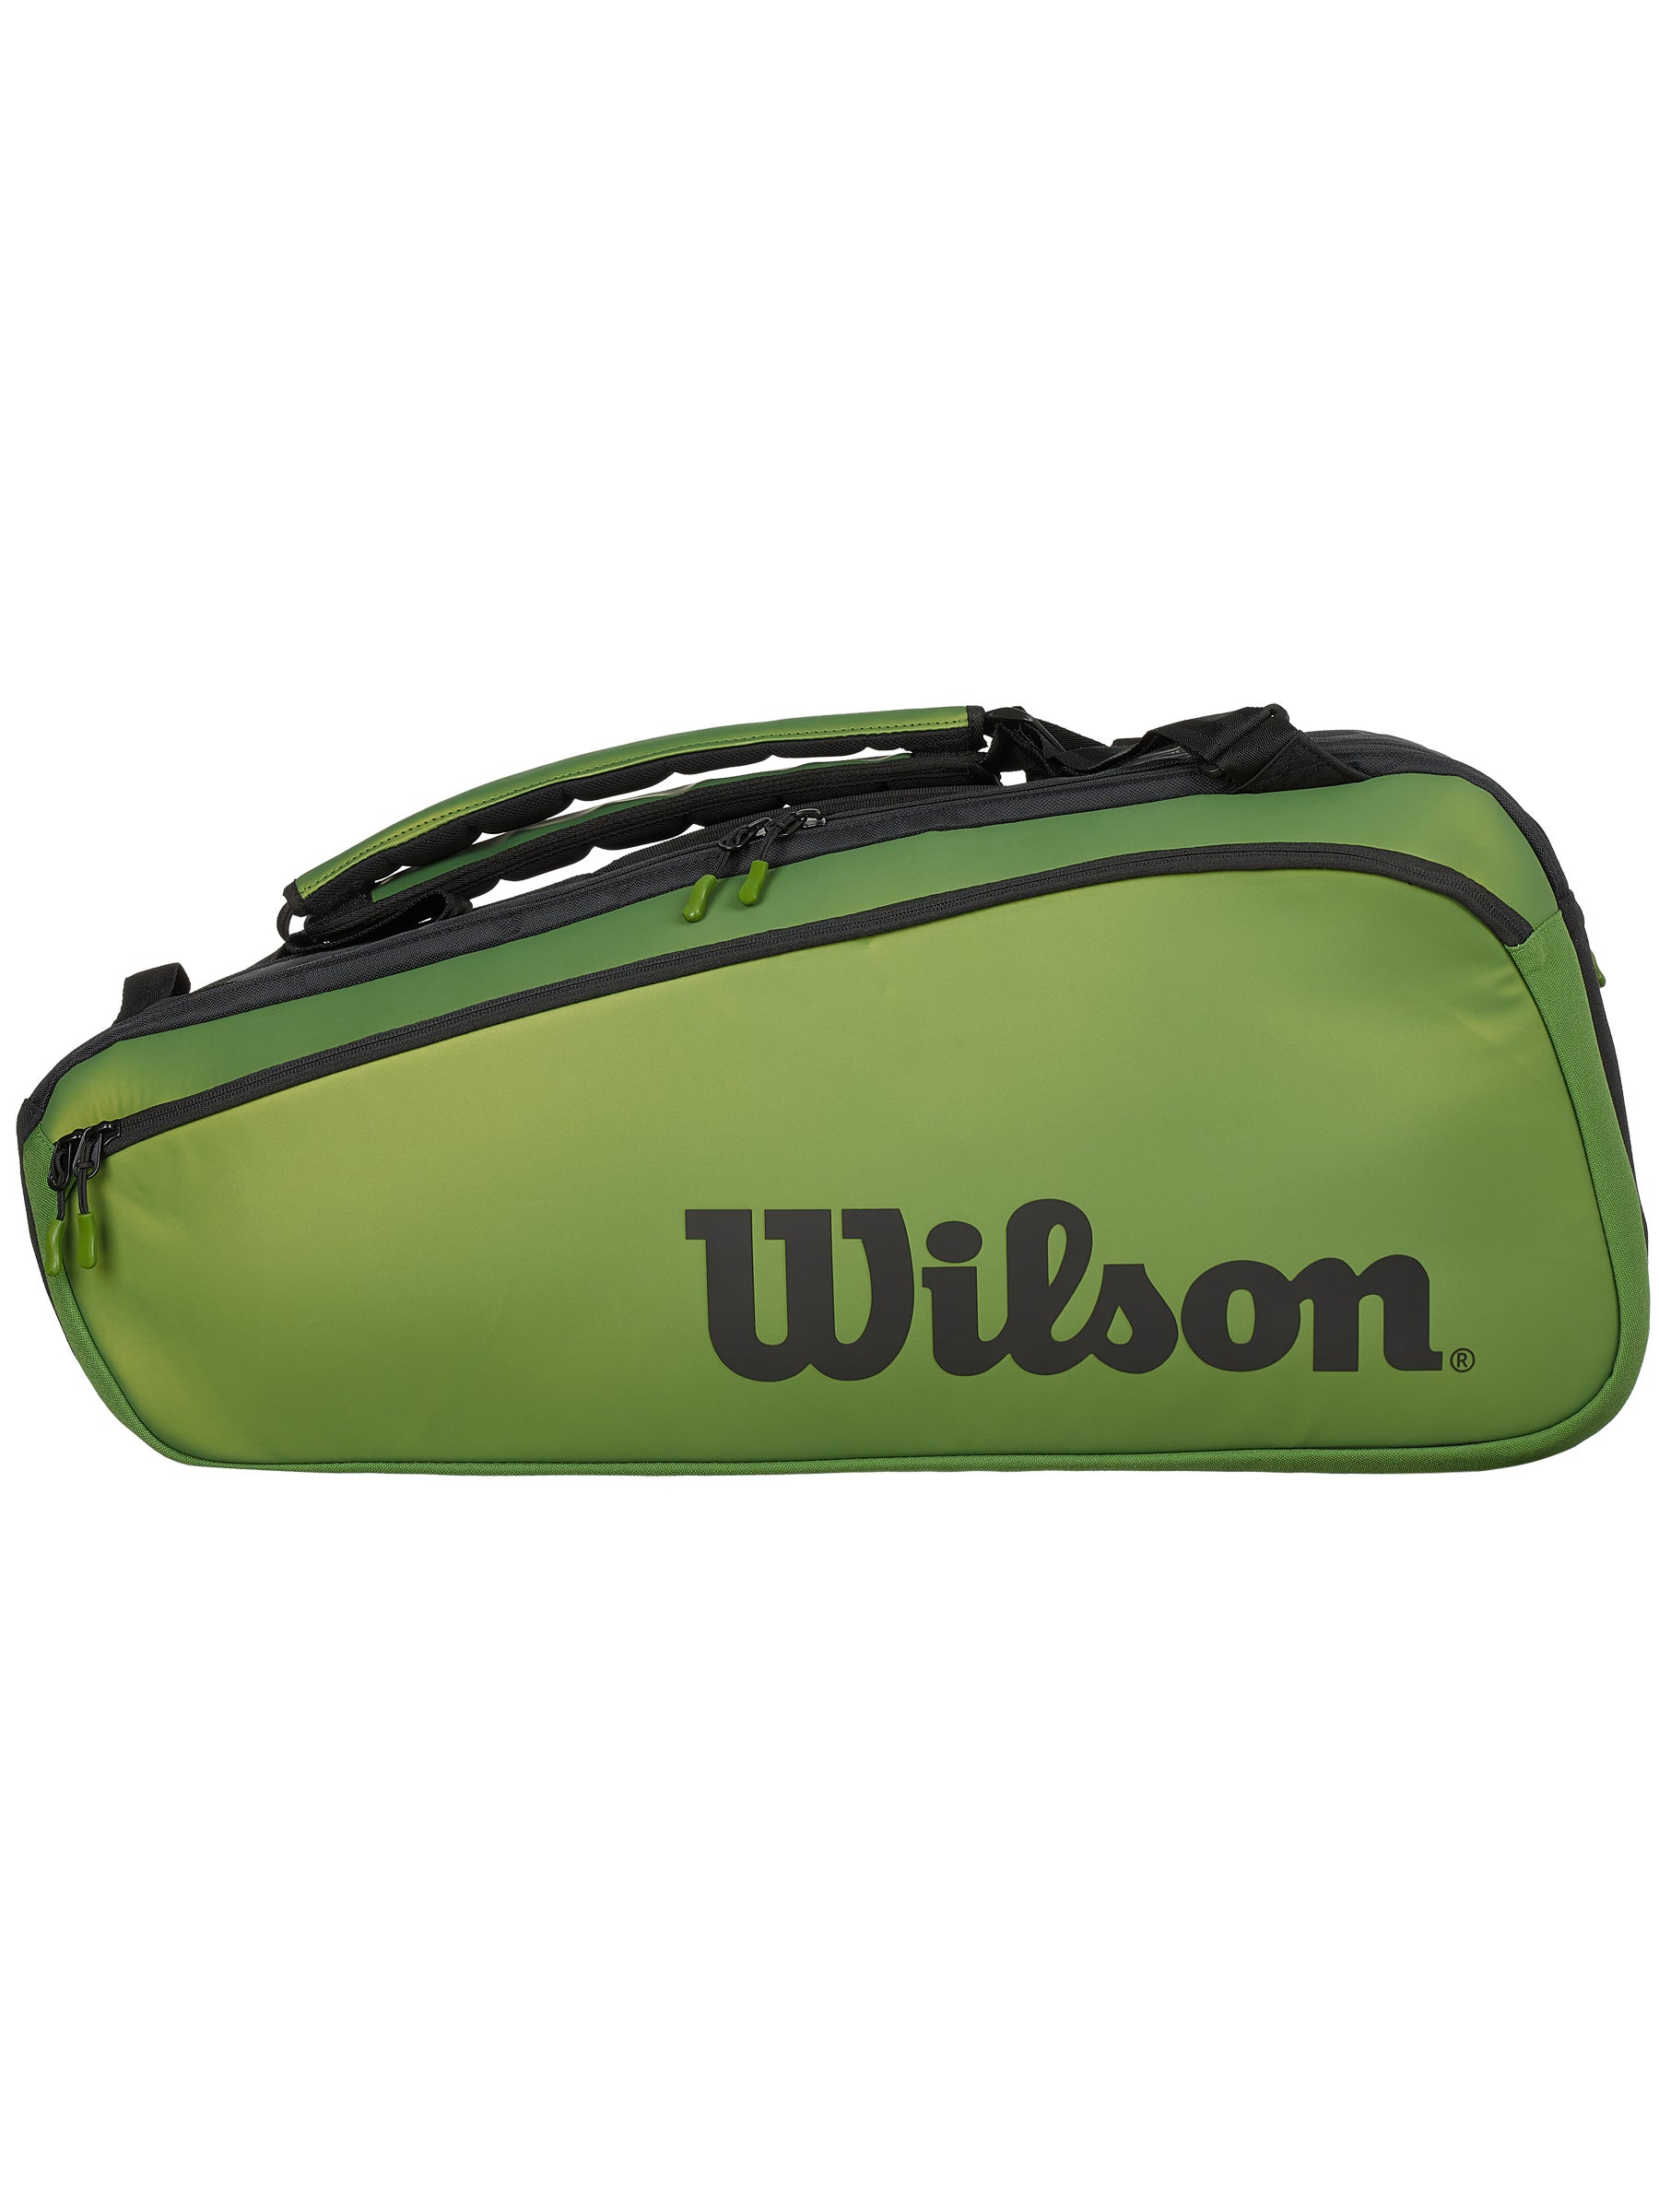 Wilson Vancouver Tennis Blade Backpack 15 Pack Sports Green 2017 NWT WRZ845715 